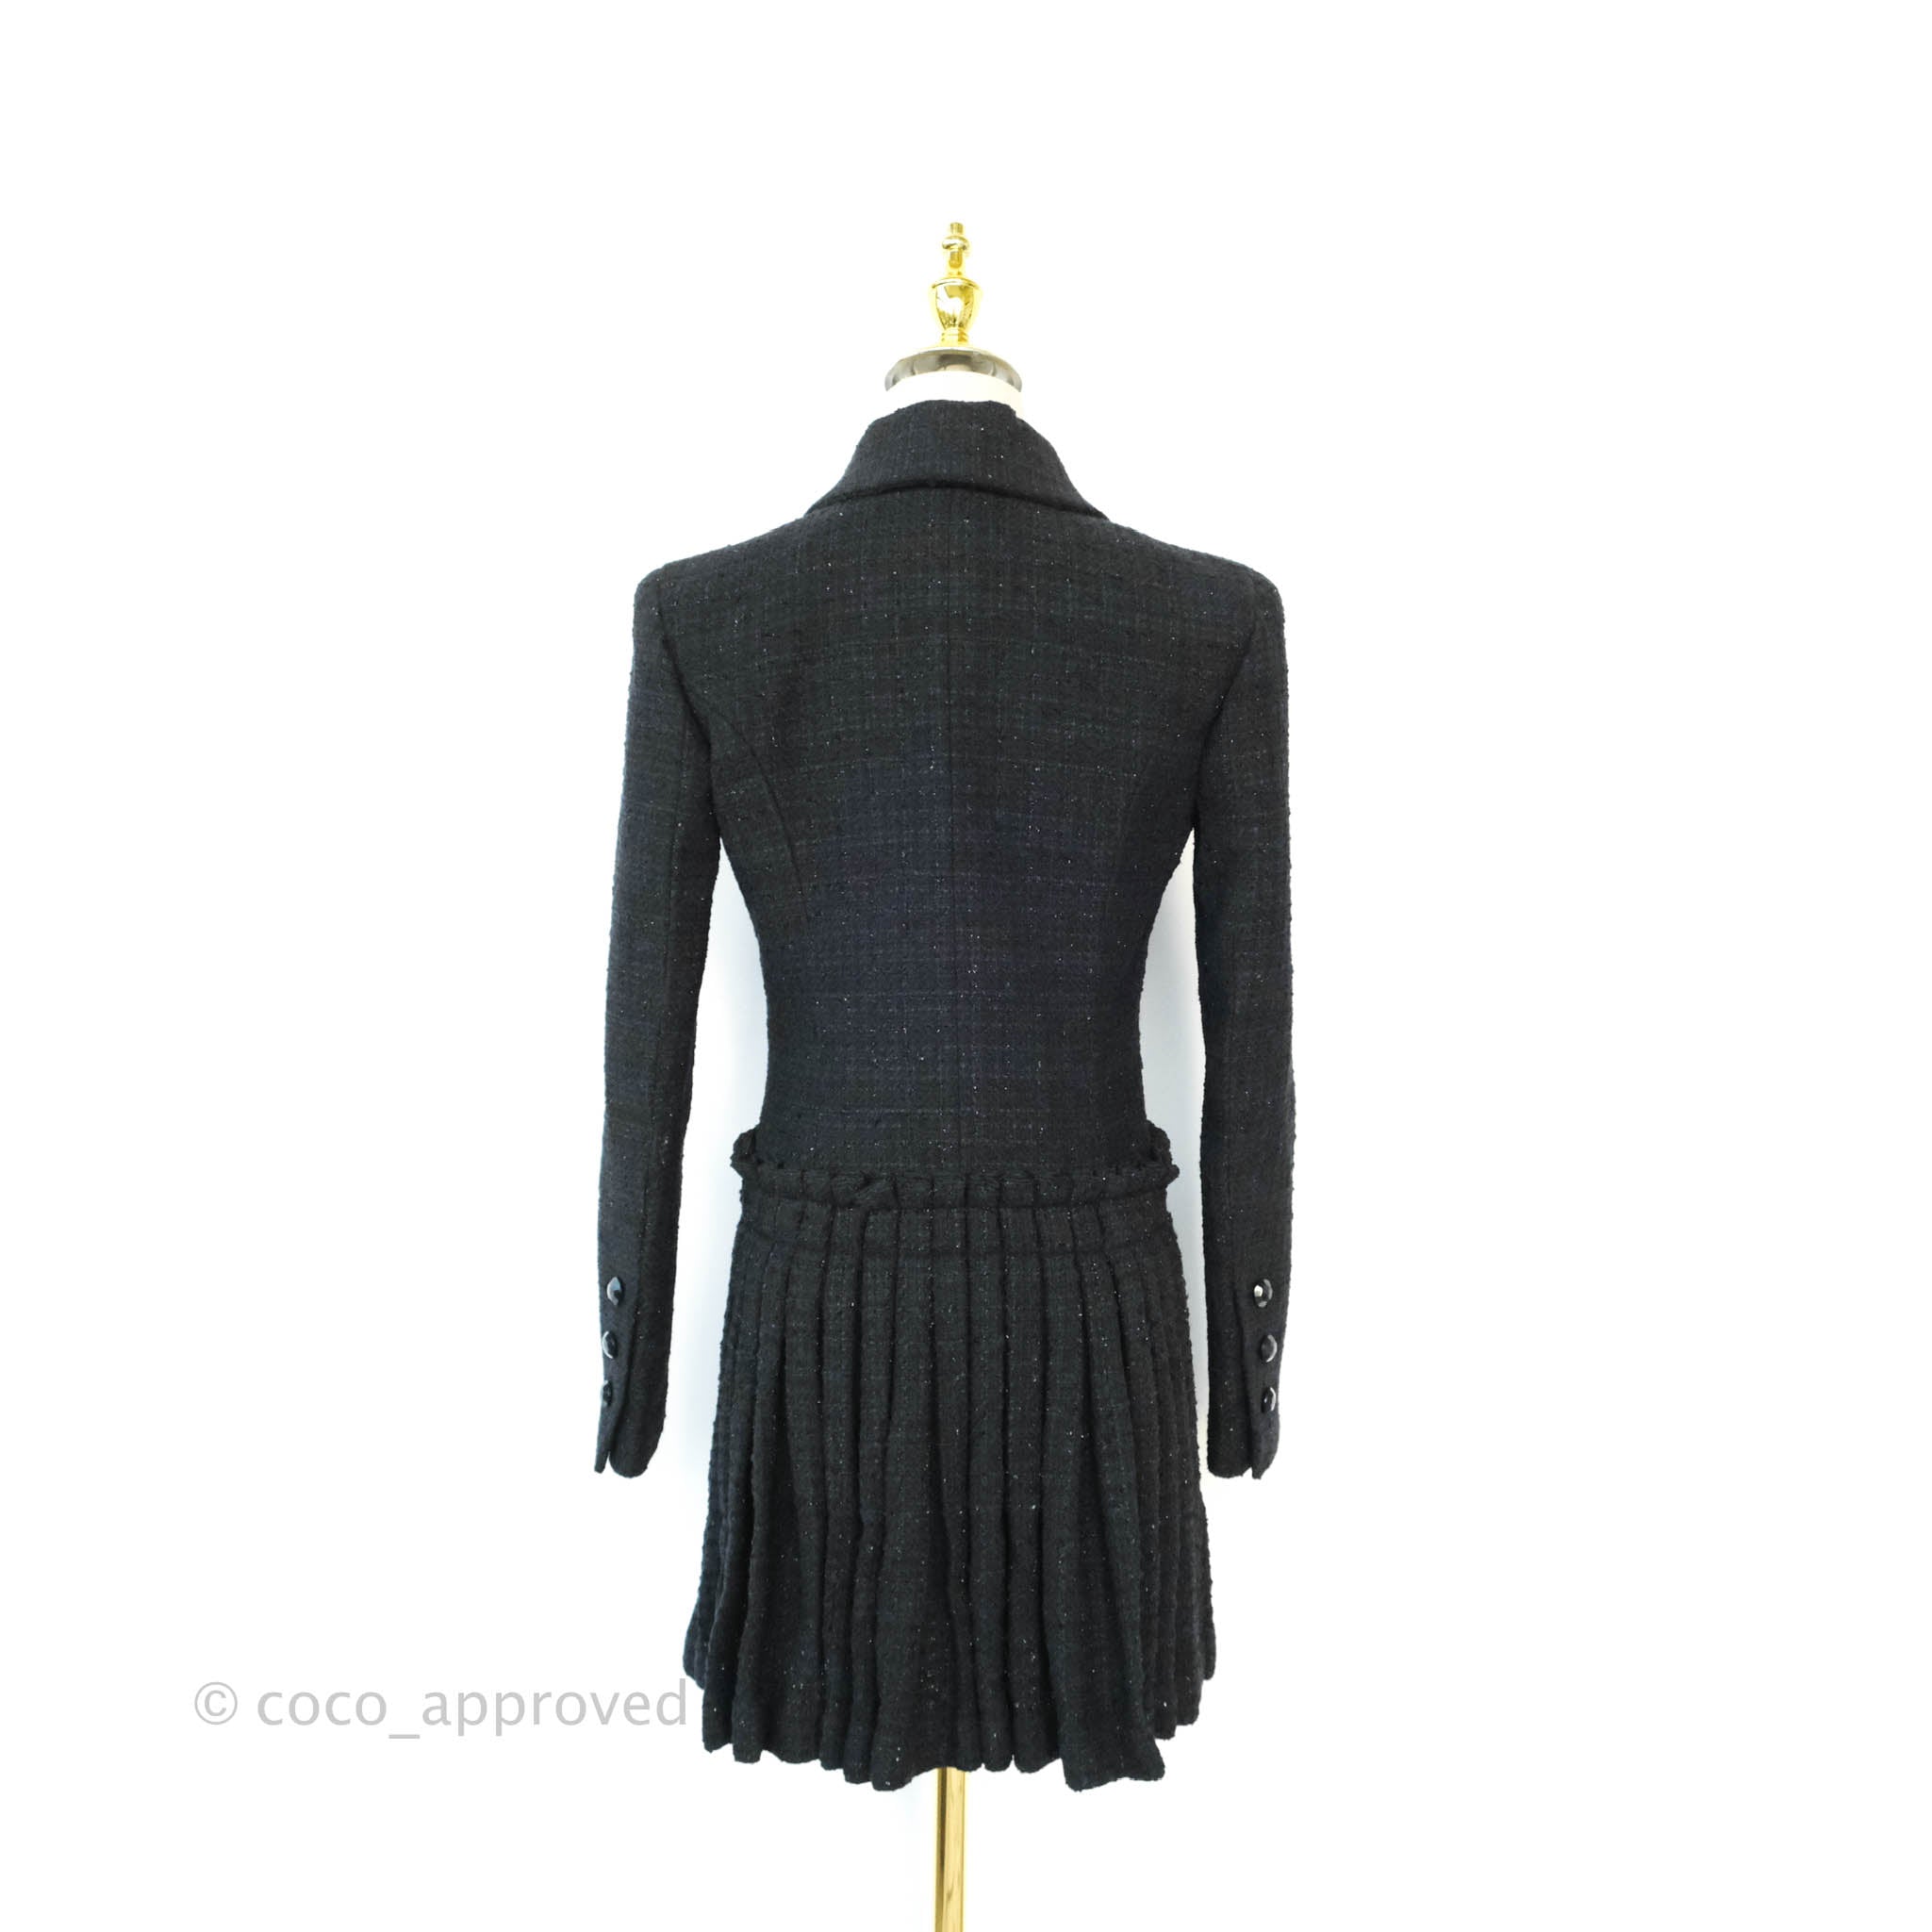 Chanel Black Navy Tweed Coat Dress 2020 Fall – Coco Approved Studio